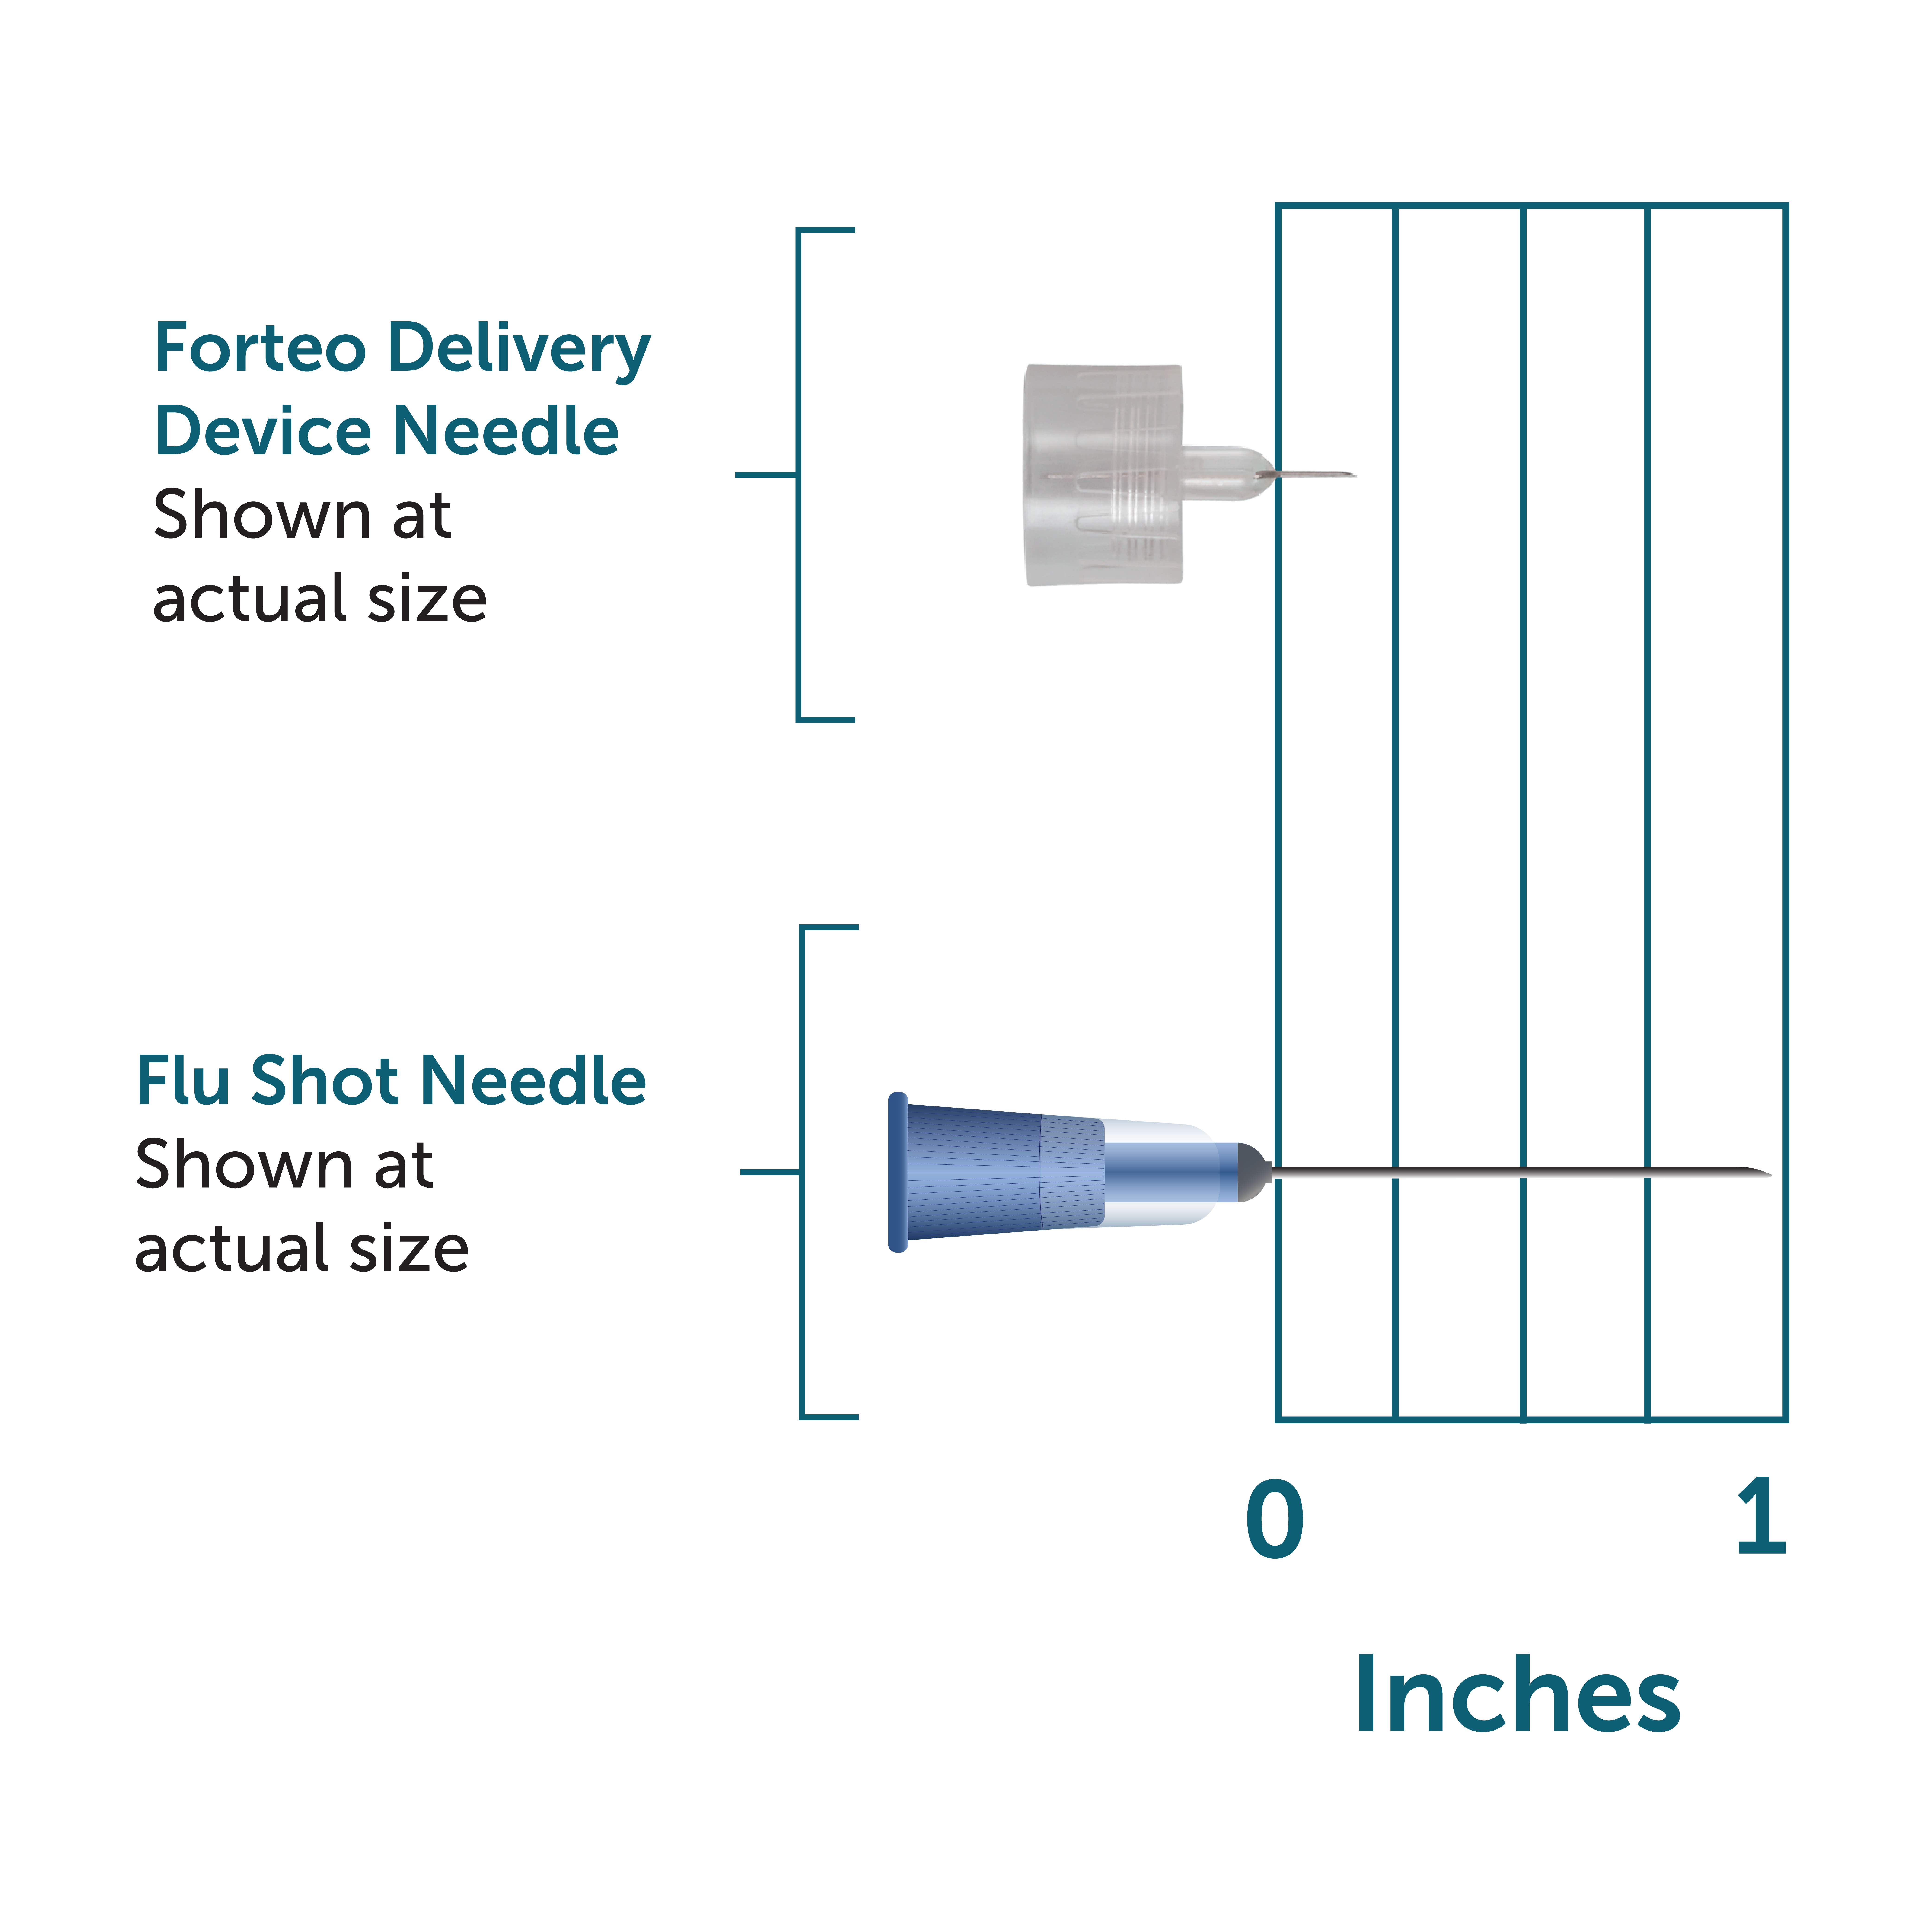 Forteo delivery device needle